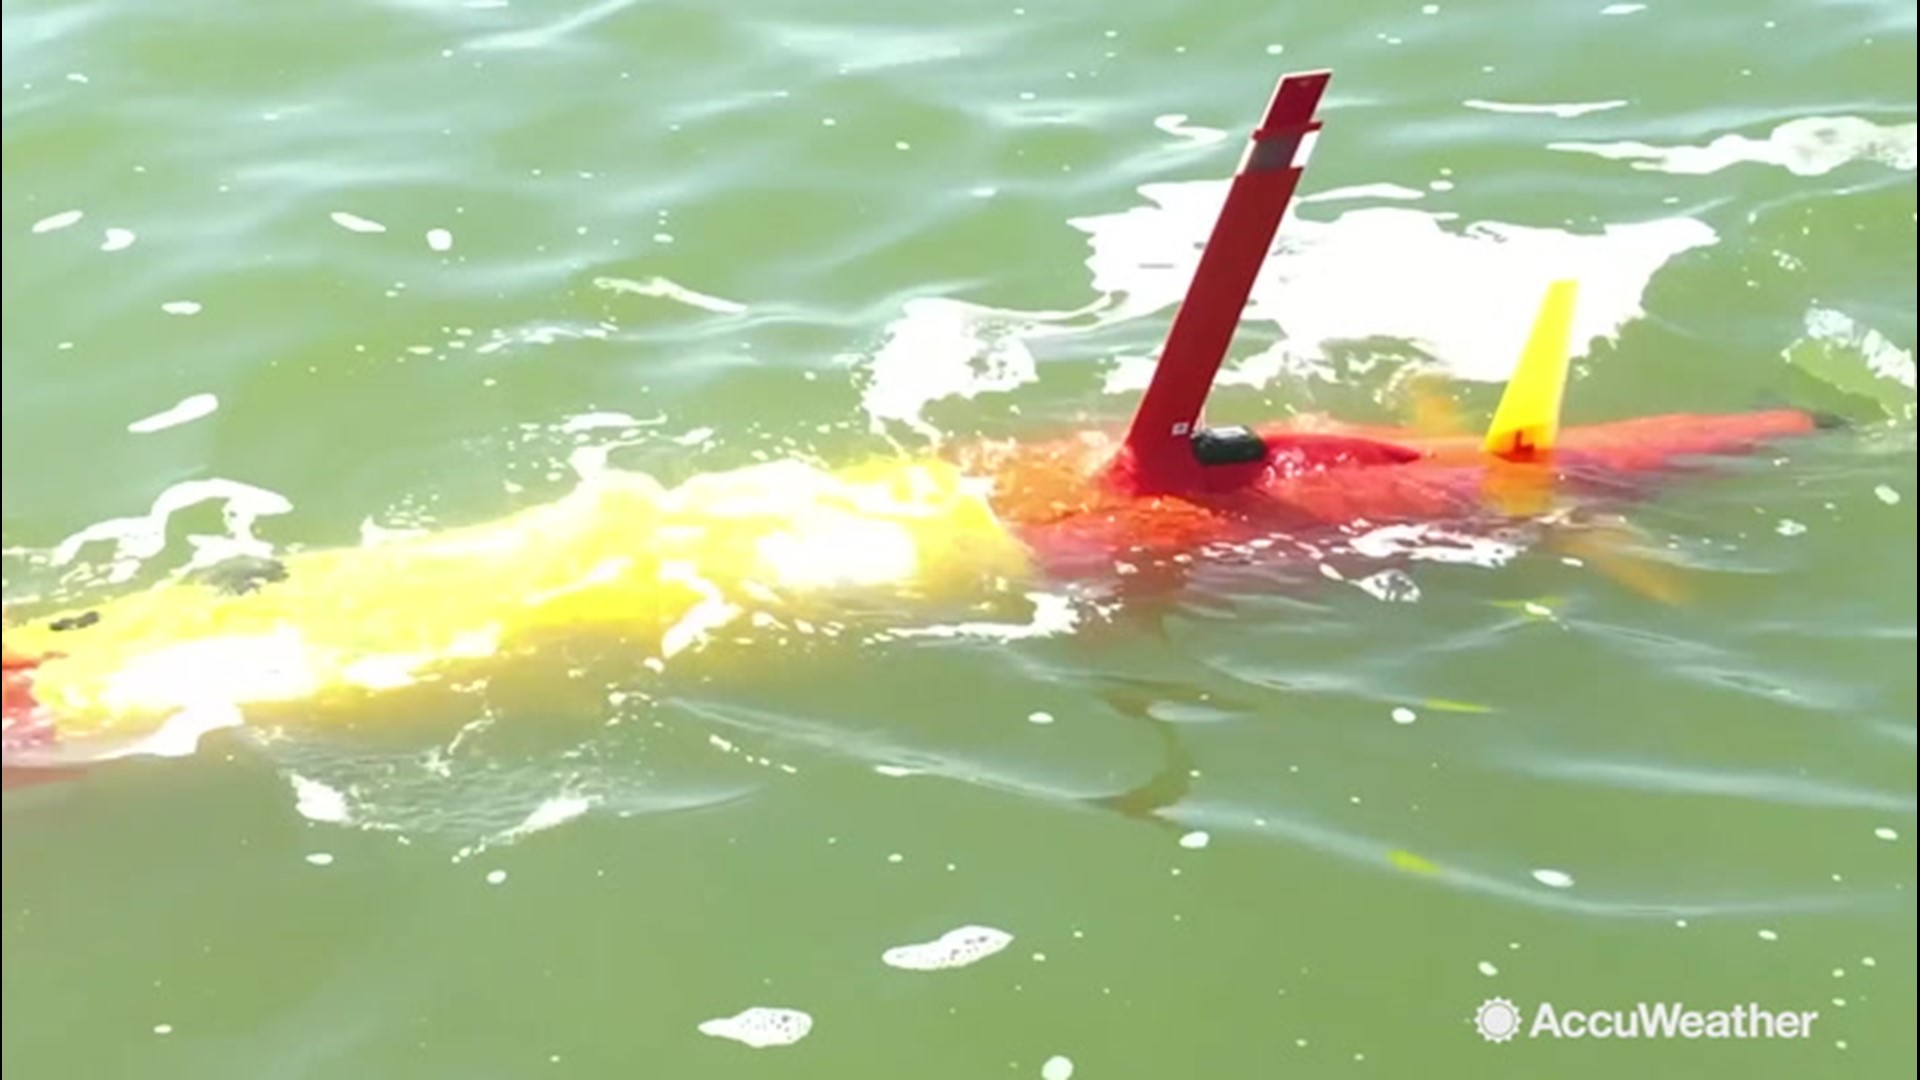 Underwater robots are on patrol in Lake Erie helping researchers better understand a harmful algae bloom that plagues the lake on an annual basis. AccuWeather's Jonathan Petramala takes us under the sea to see what they are getting.